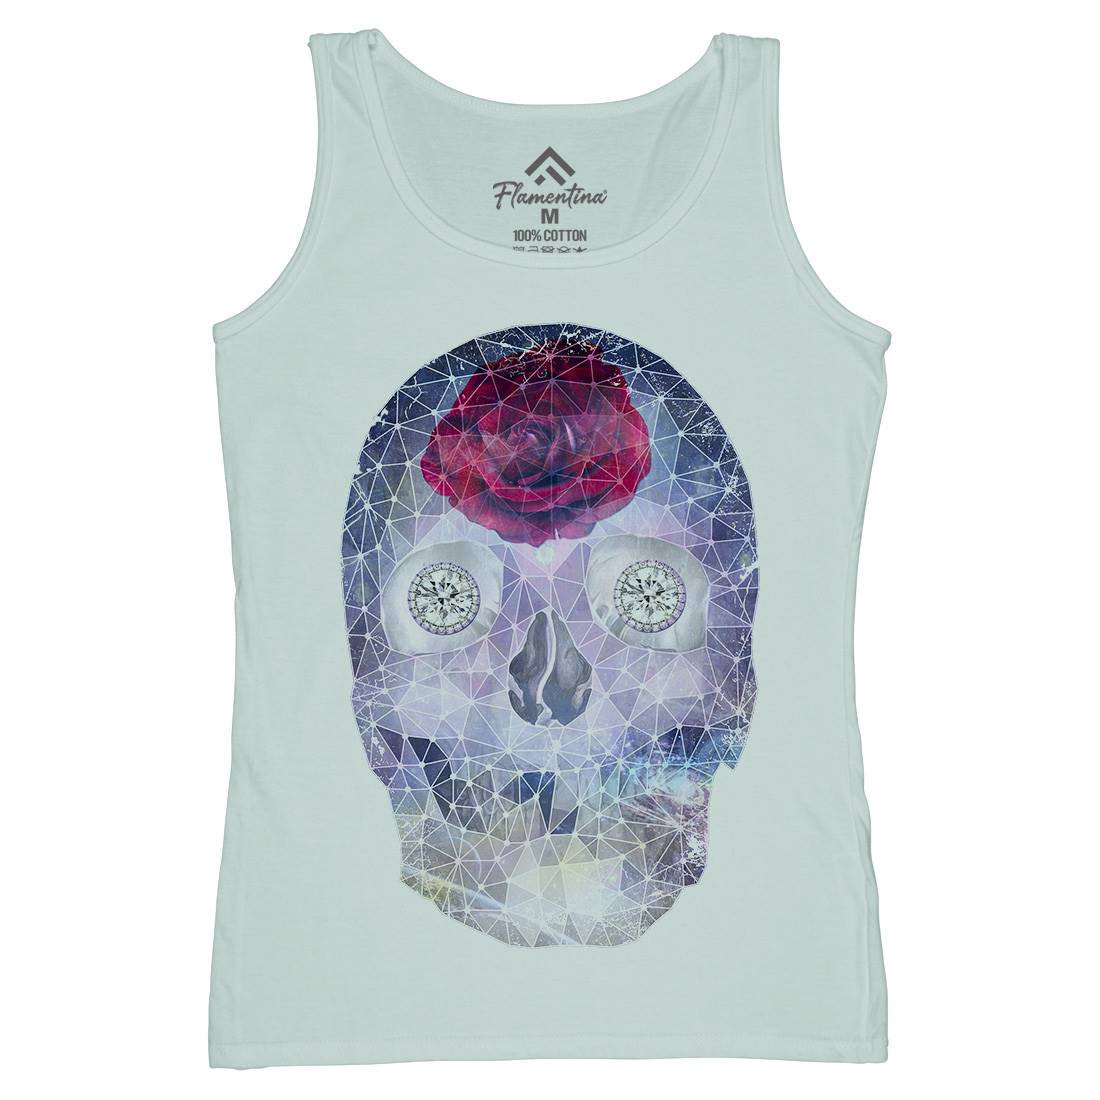 Crystal Skull Womens Organic Tank Top Vest Space A816